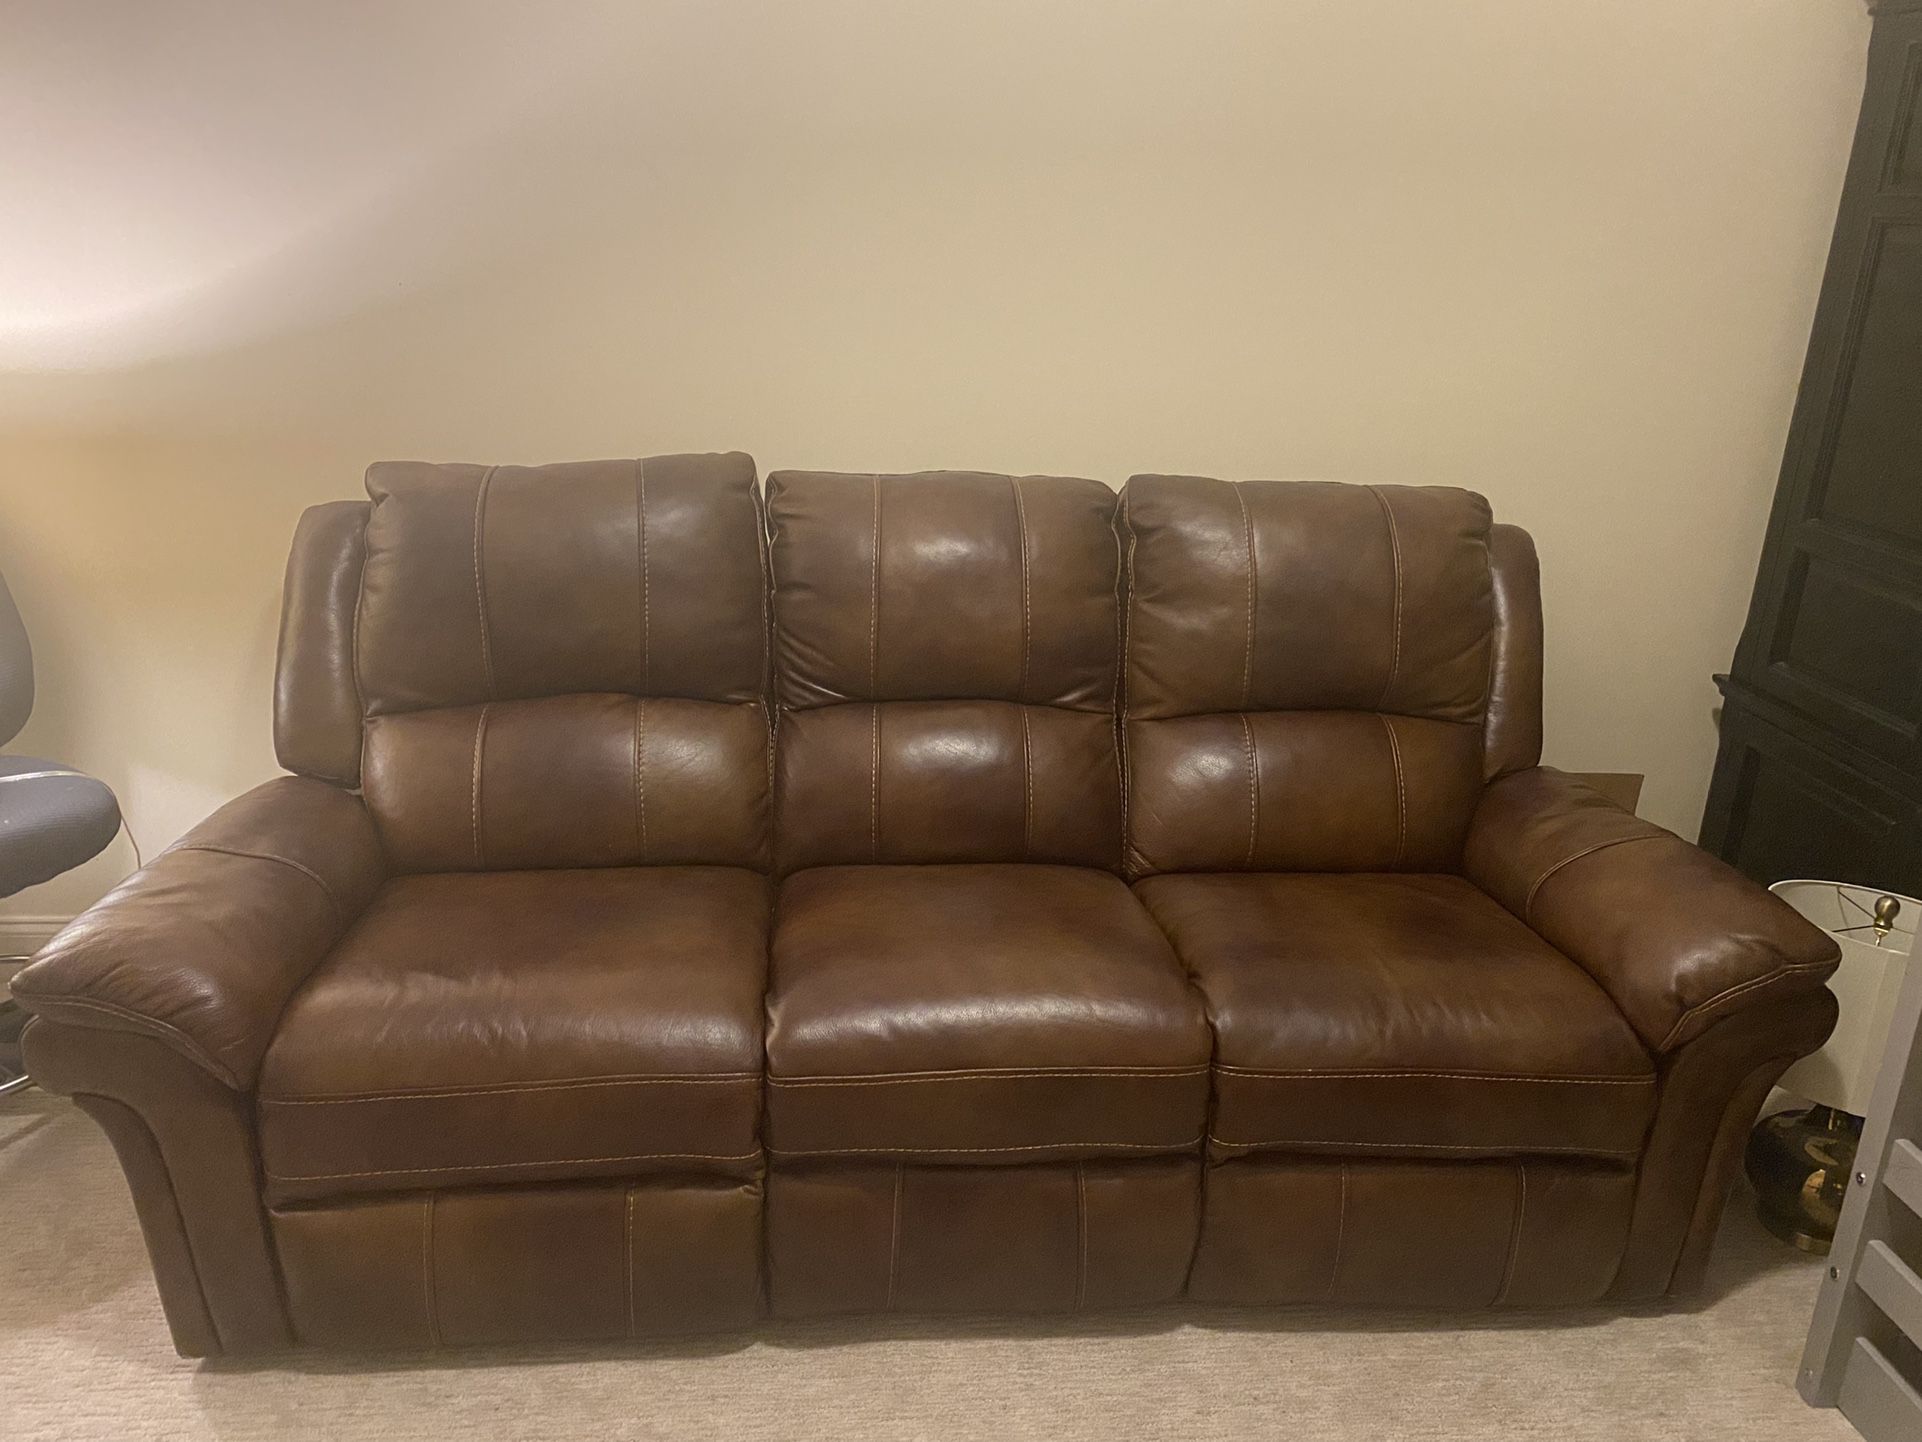 Haverty’s Leather Sofa Brown With Two Recliner Seats